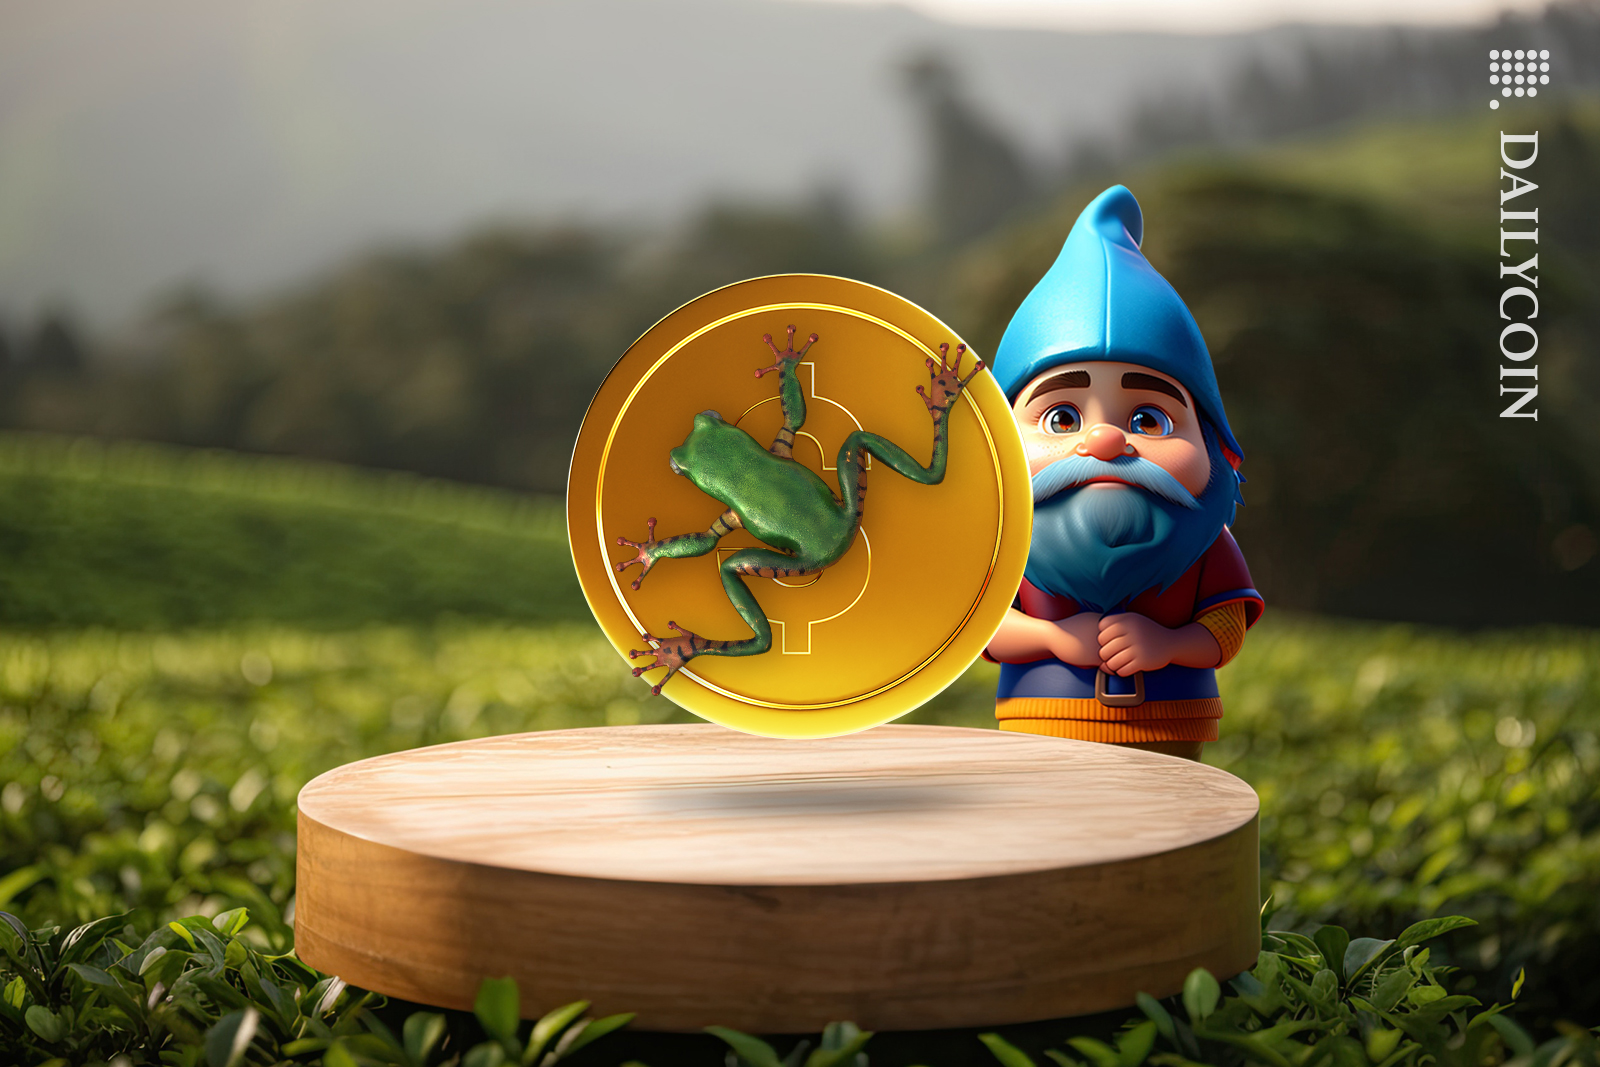 View of a close up grass with a wooden podium and a small dollar coin with tiny frog hovering above it. Behind the podium a gnome is standing and holding his hands together.